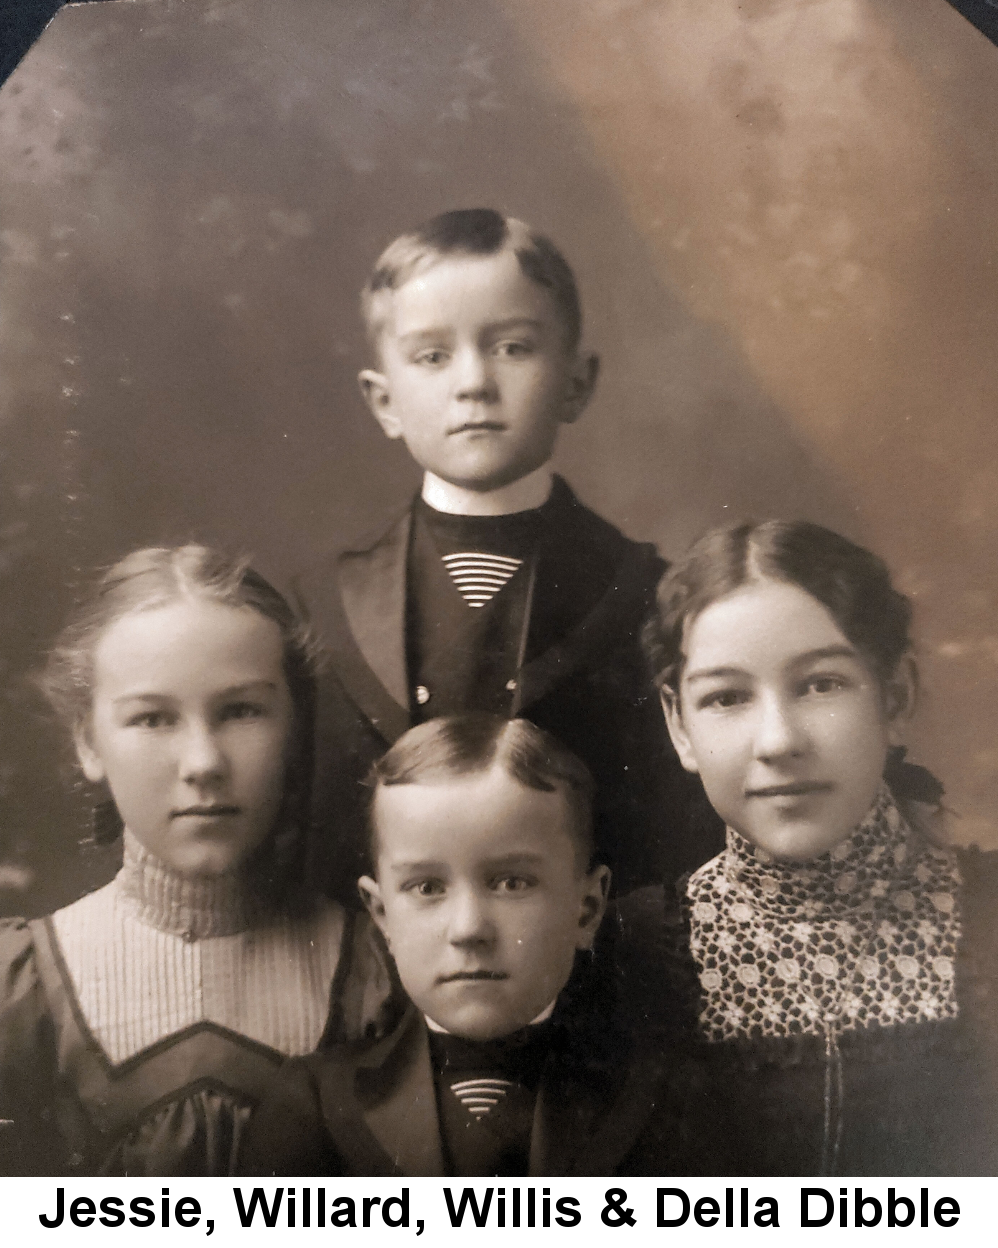 IMAGE/PHOTO: Jessie, Willard, Willis & Della Dibble: Black and white photo of four children: two boys in identical shirts, jackets and vests, one standing behind the other, flanked by a blond girl on the left and brunette girl on the right.